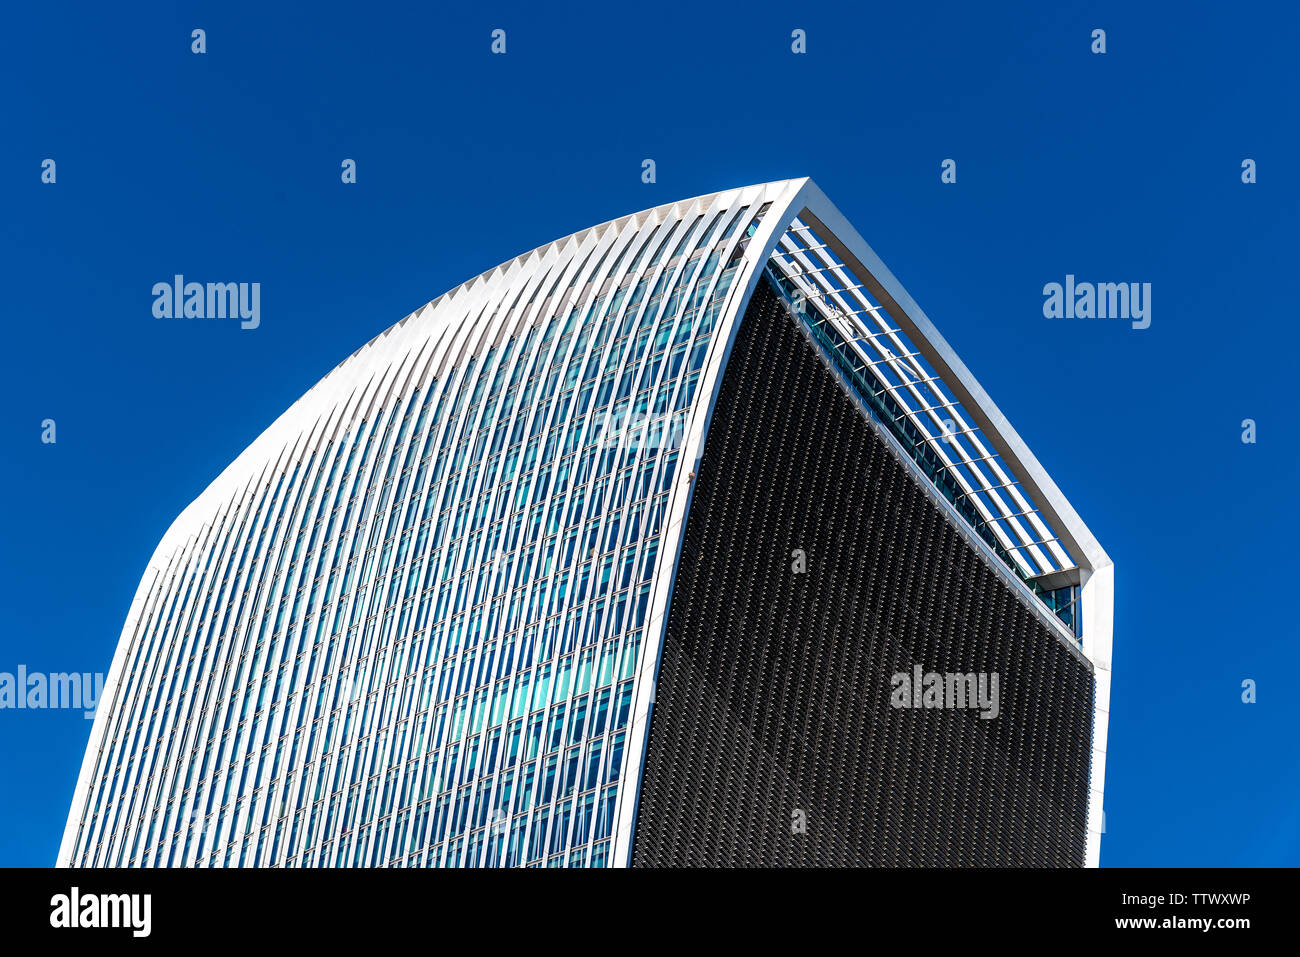 London, UK - May 14, 2019: Low angle view of 20 Fenchurch skyscraper in London agaisnt blue sky. Also known as Walkie Talkie building Stock Photo